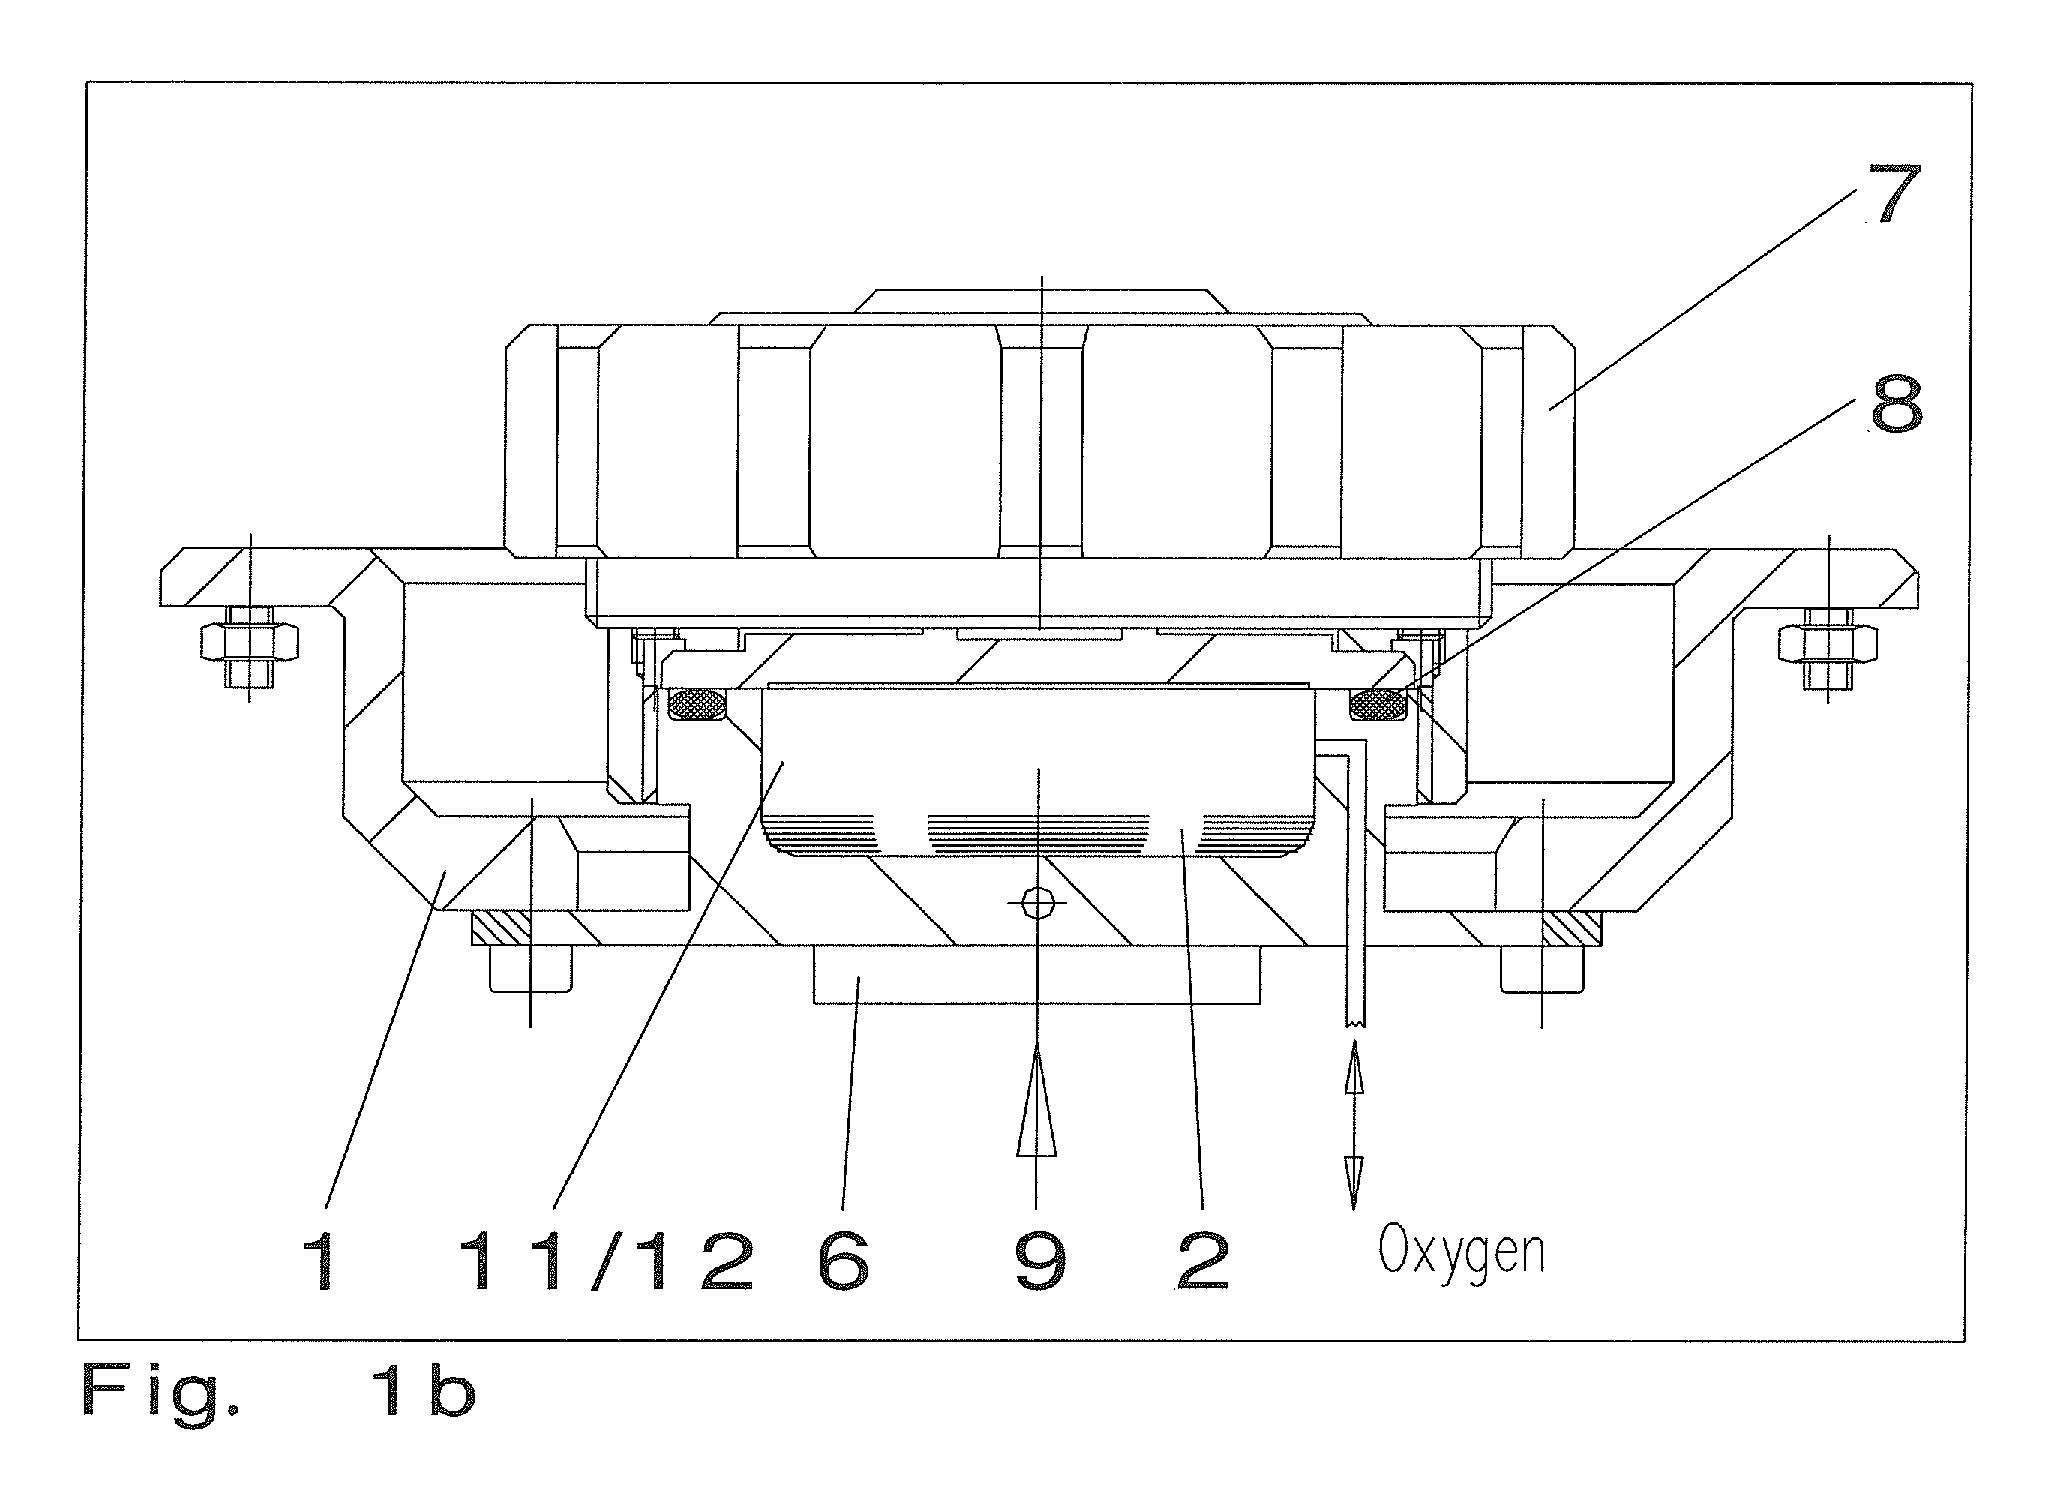 Method and device for an accelerated oxidation test of fuels or petroleum products, as well as a computer program for controlling such a device, and a corresponding computer readable storage medium